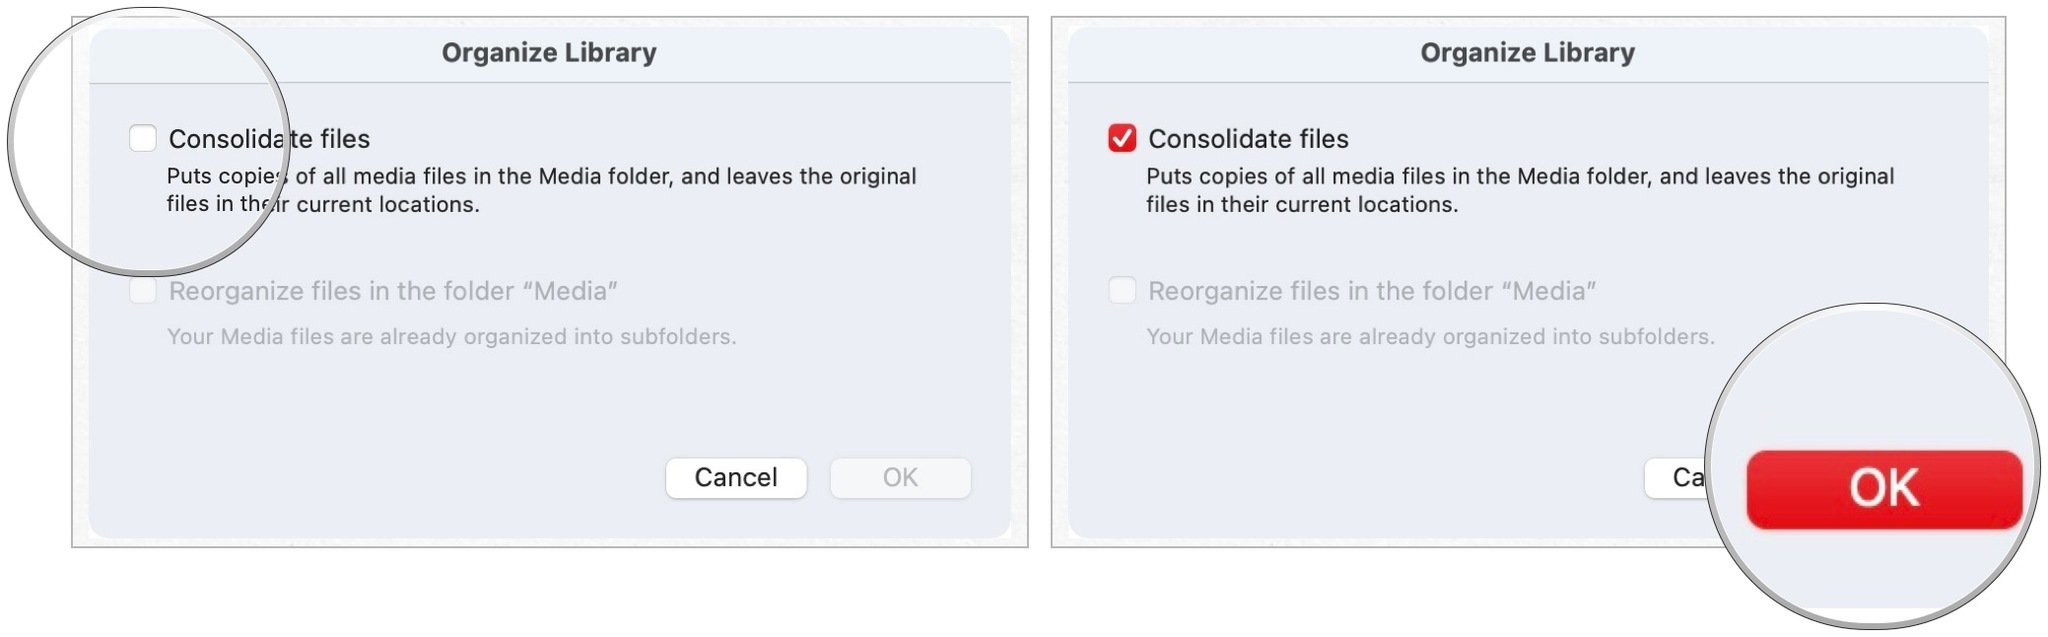 To consolidate your music library, tick the box for Consolidate Files, then click OK.